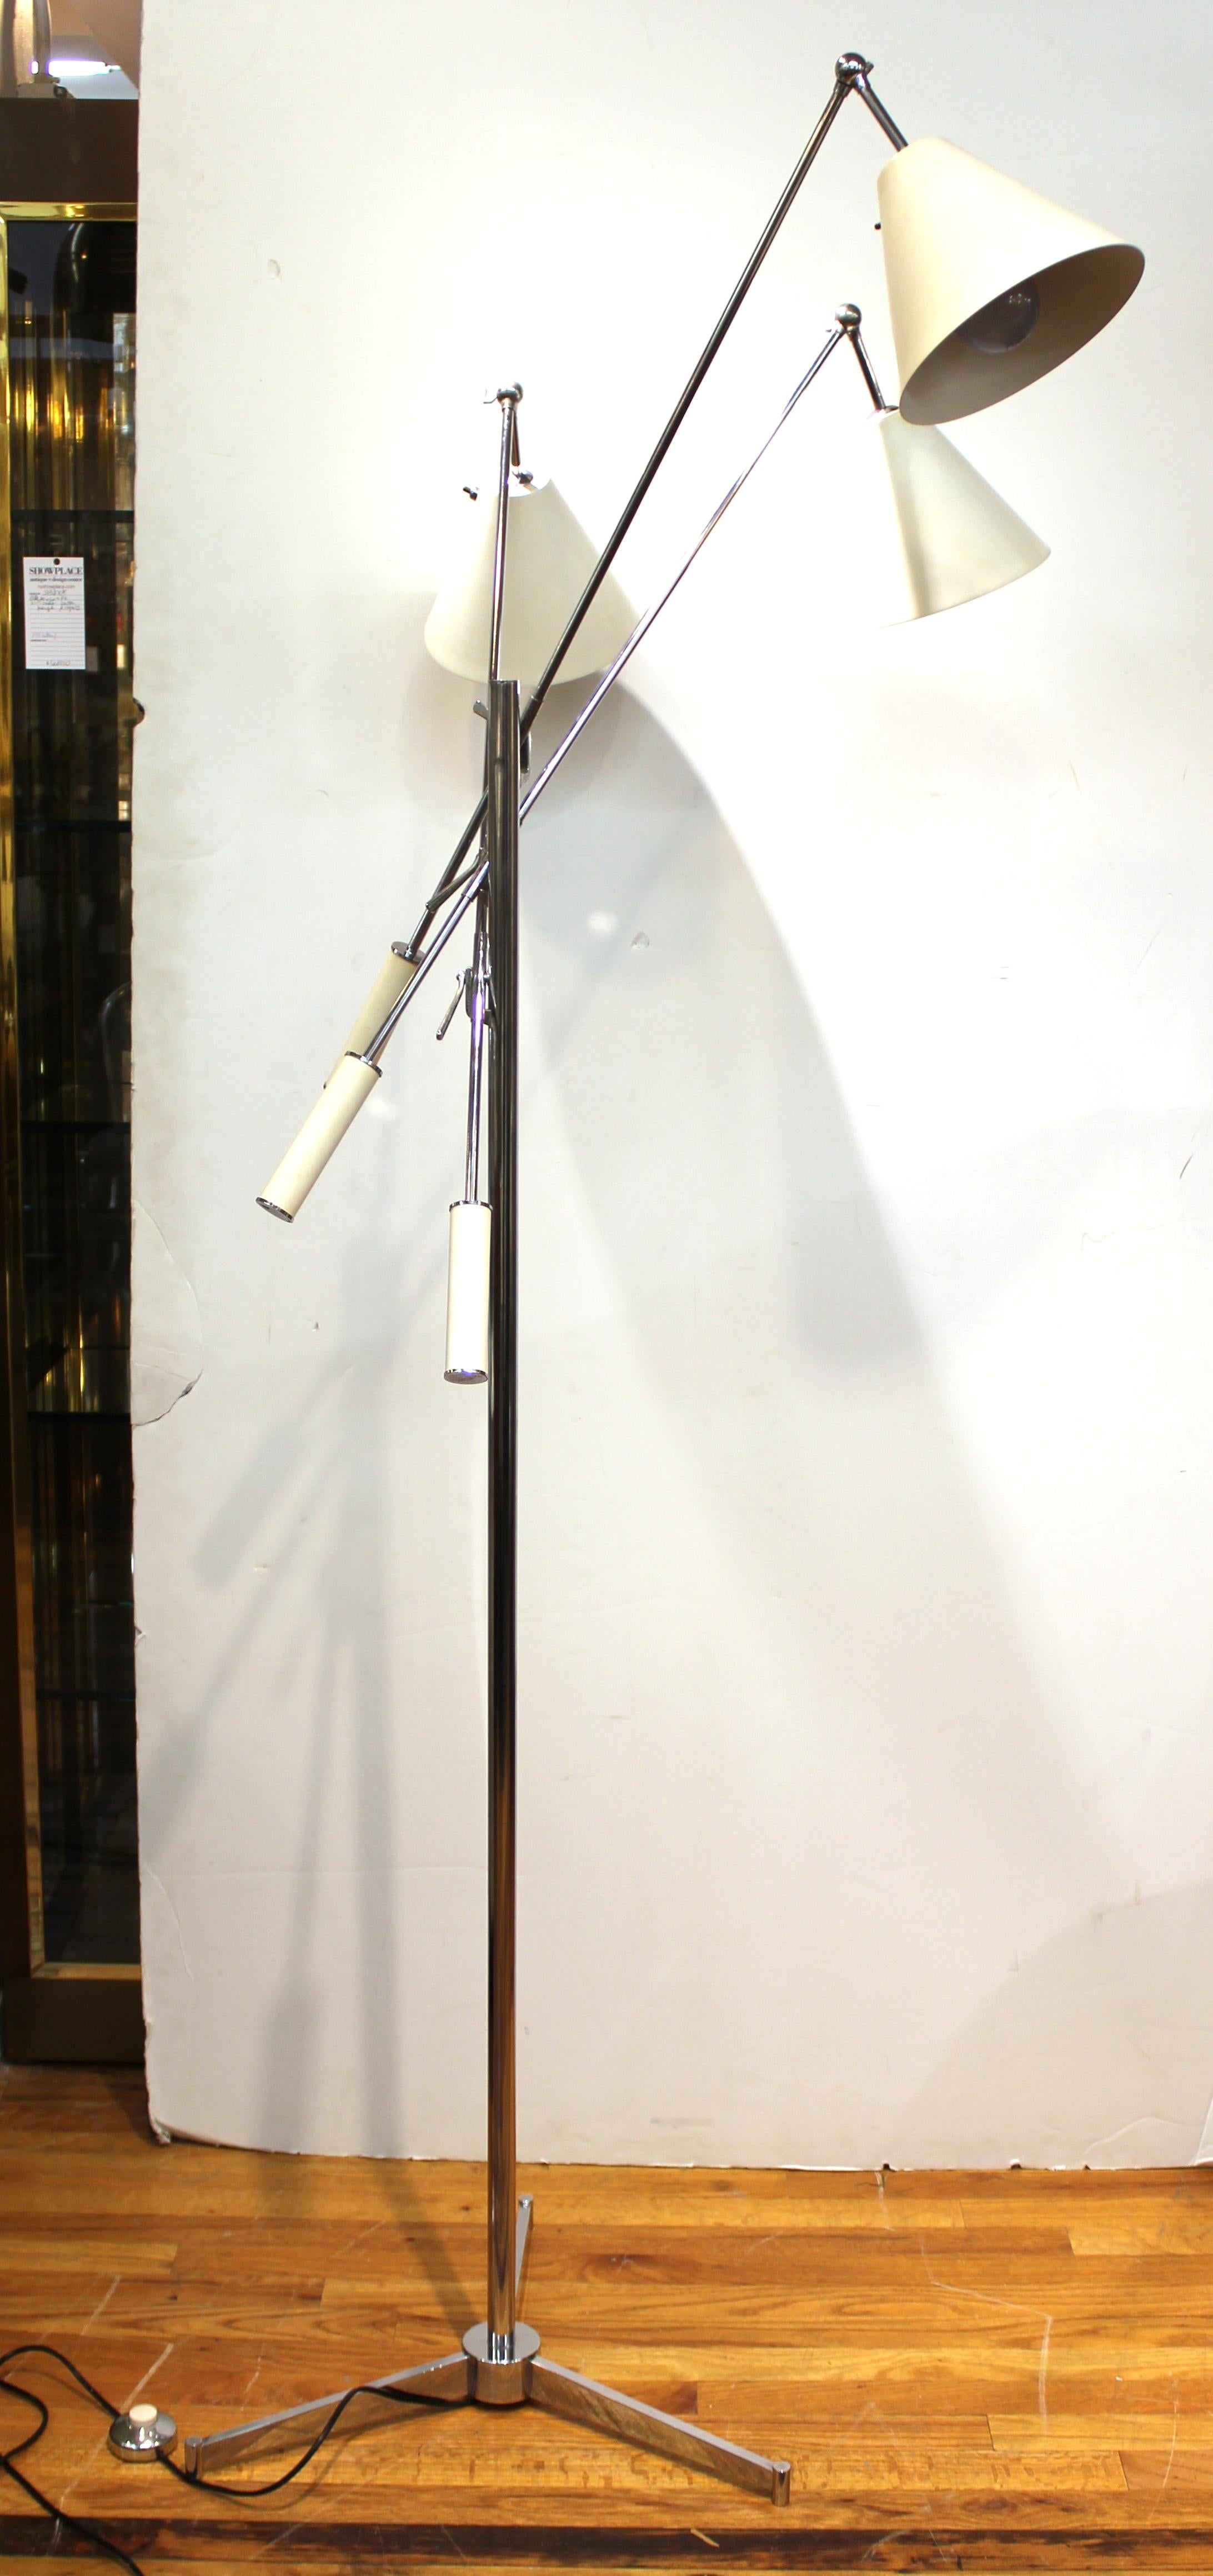 Arredoluce Italian modern Triennale floor lamp designed by Angelo Lelli with three articulated arms. The piece is in great vintage condition and is marked on the bottom.